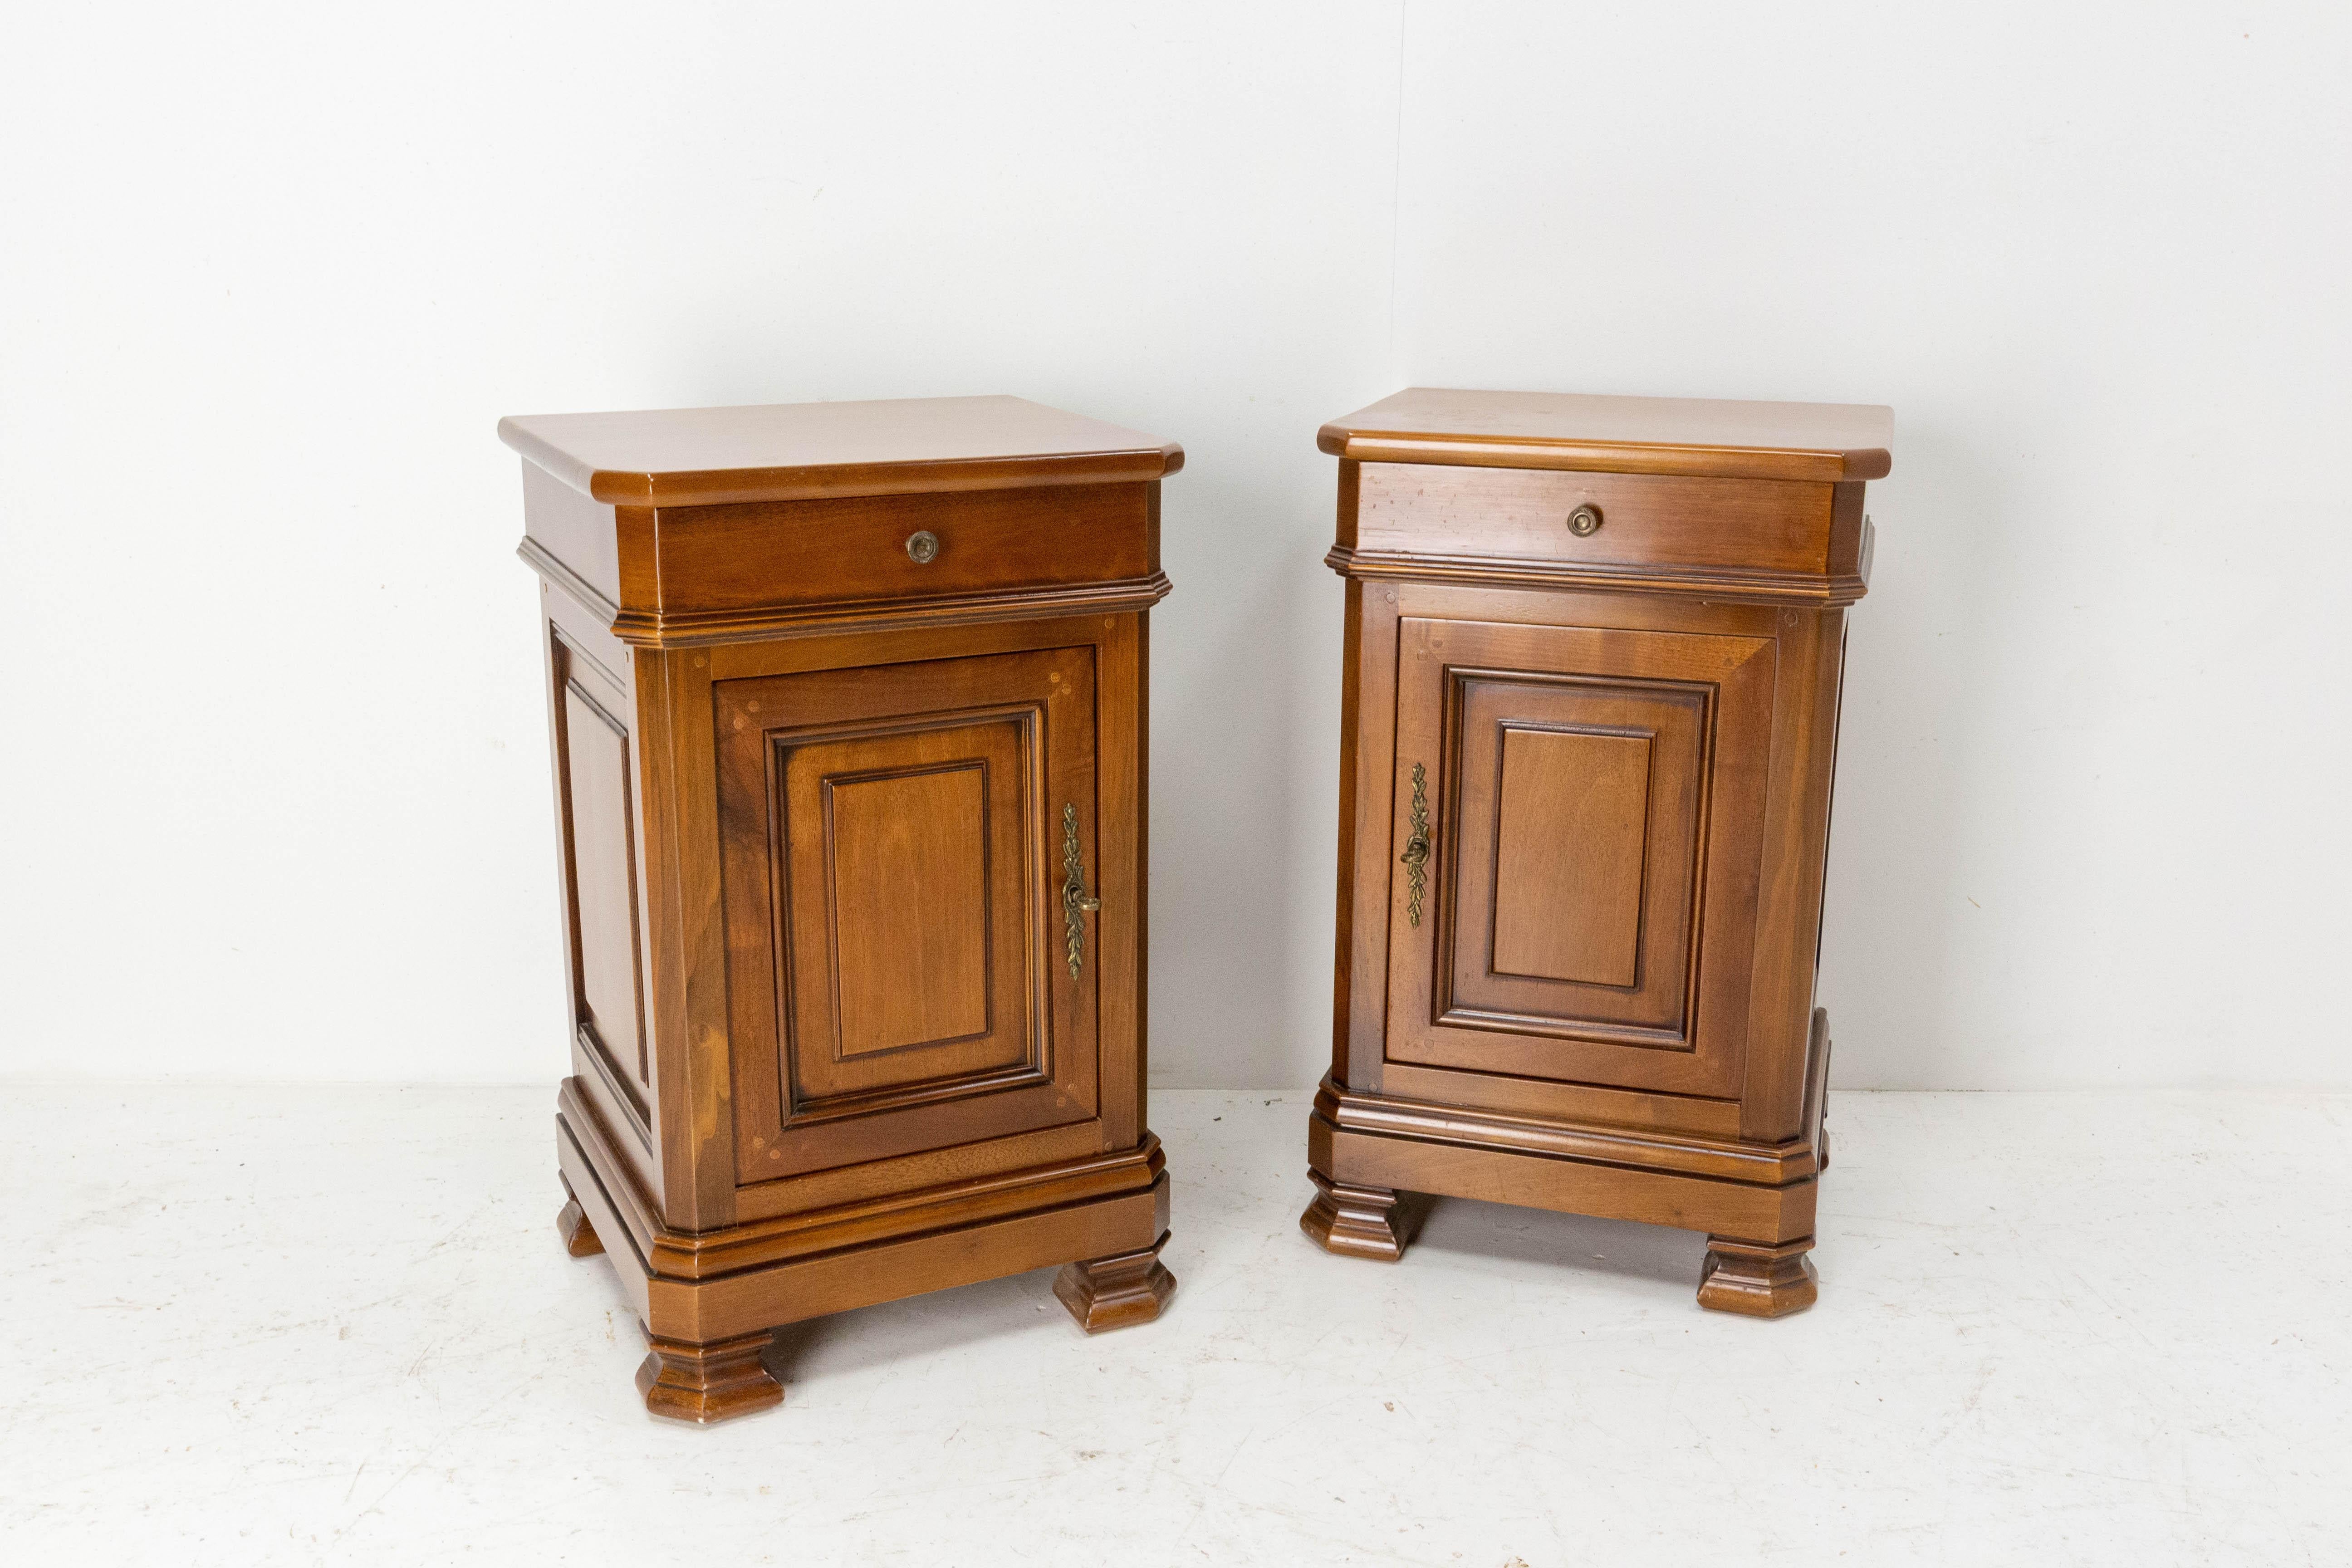 Pair of French side cabinet late 20th century
Louis Philippe style nightstands 
Elm bedside tables
In each nightstand, there is one drawer in in the cabinet there is one shelf
Very good condition

Shipping:
L 76 P 45 H 72,5 cm 39 kg.